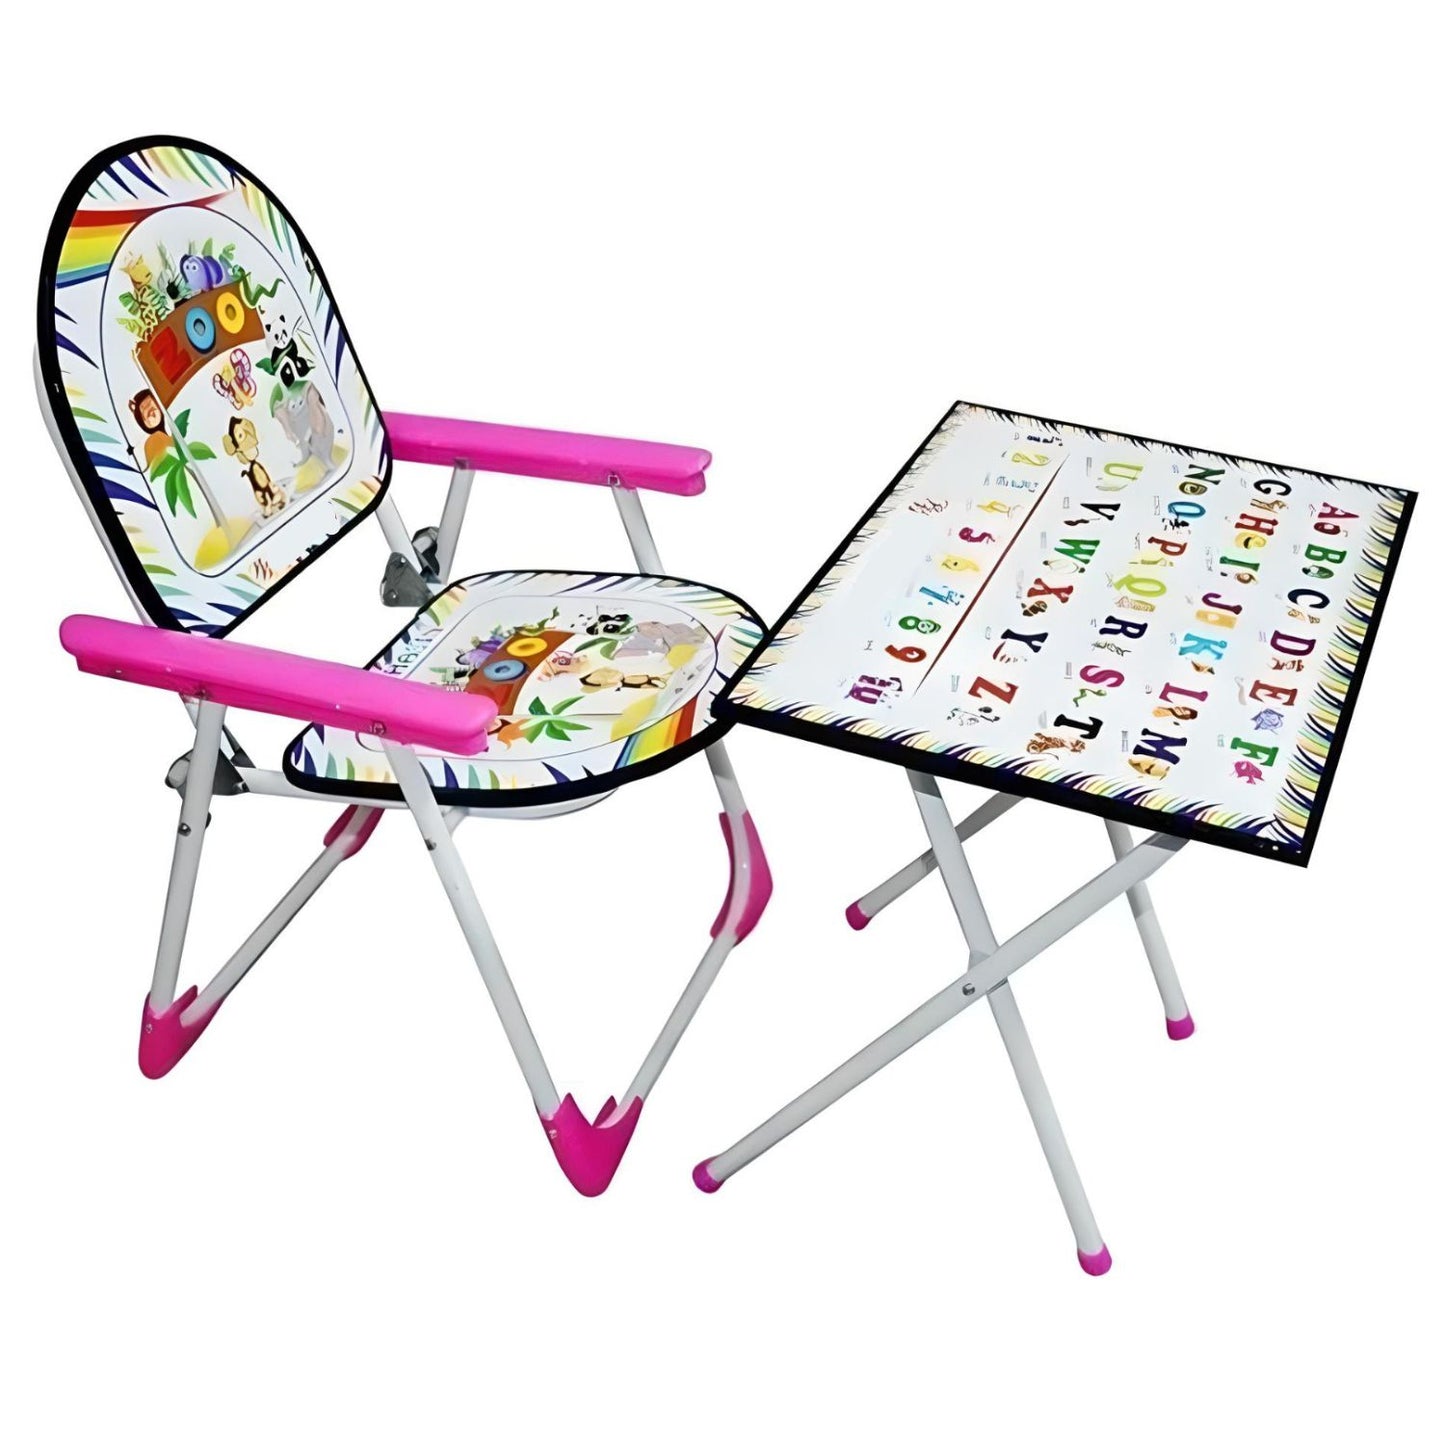 MM TOYS Multipurpose Folding Table And Chair Set Gift For 2 3 4 Year Old Kids With Educational Print -Multicolor